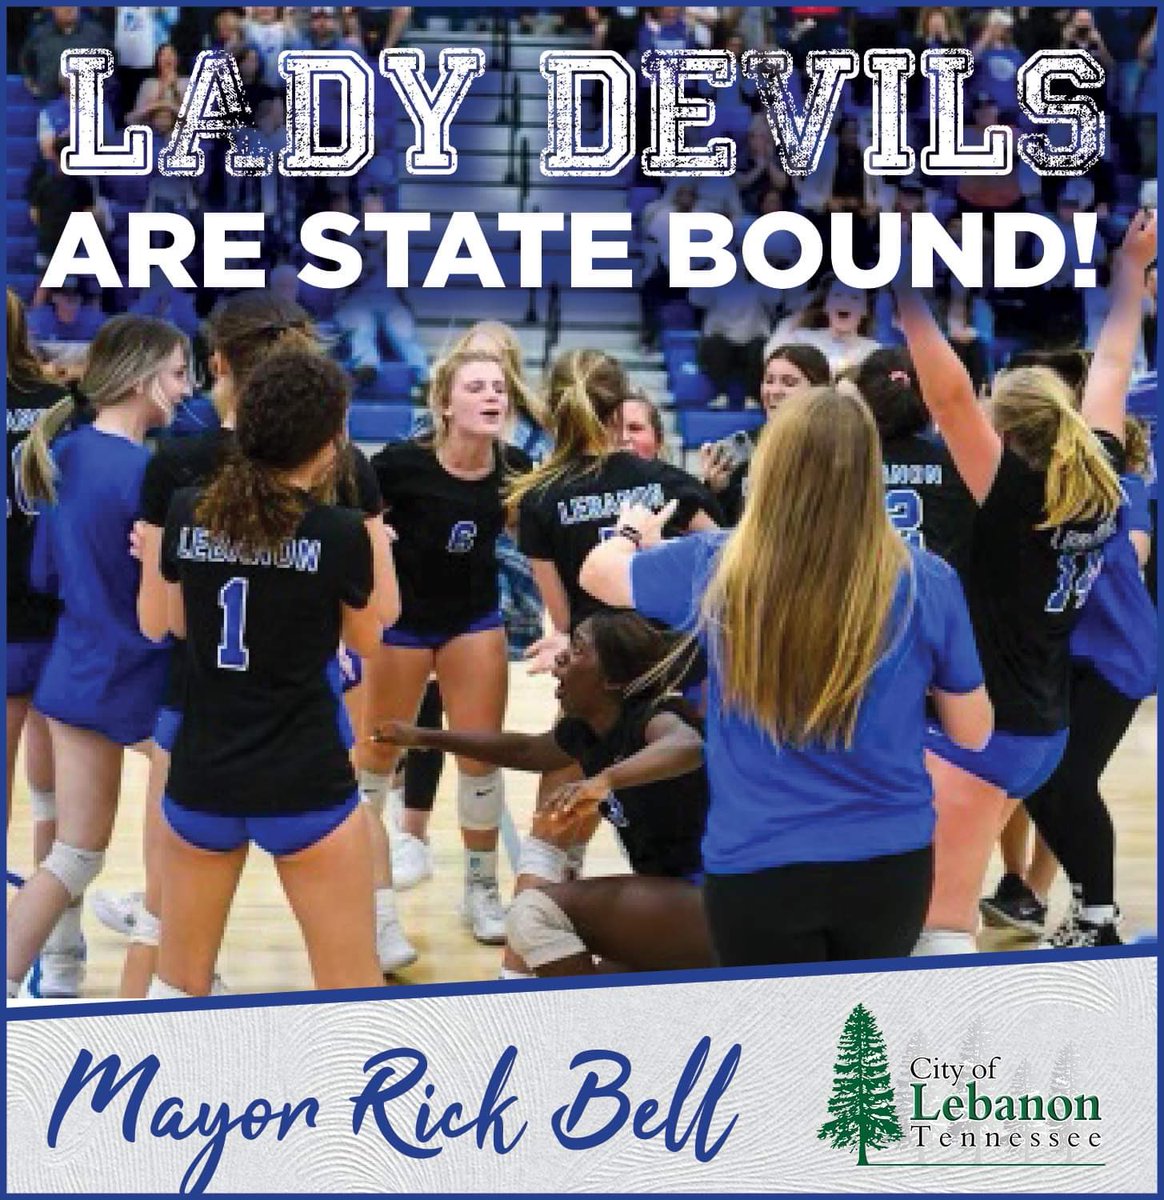 The Lady Devils are STATE BOUND! Swept Bradley Central 3-0 last night, at home, in Substate. First time LHS Volleyball has made it to State in 21 years! We are so proud of these athletes! @lebanon_high @LebanonVolley #GoBlue #OnceABlueDevilAlwaysABlueDevil